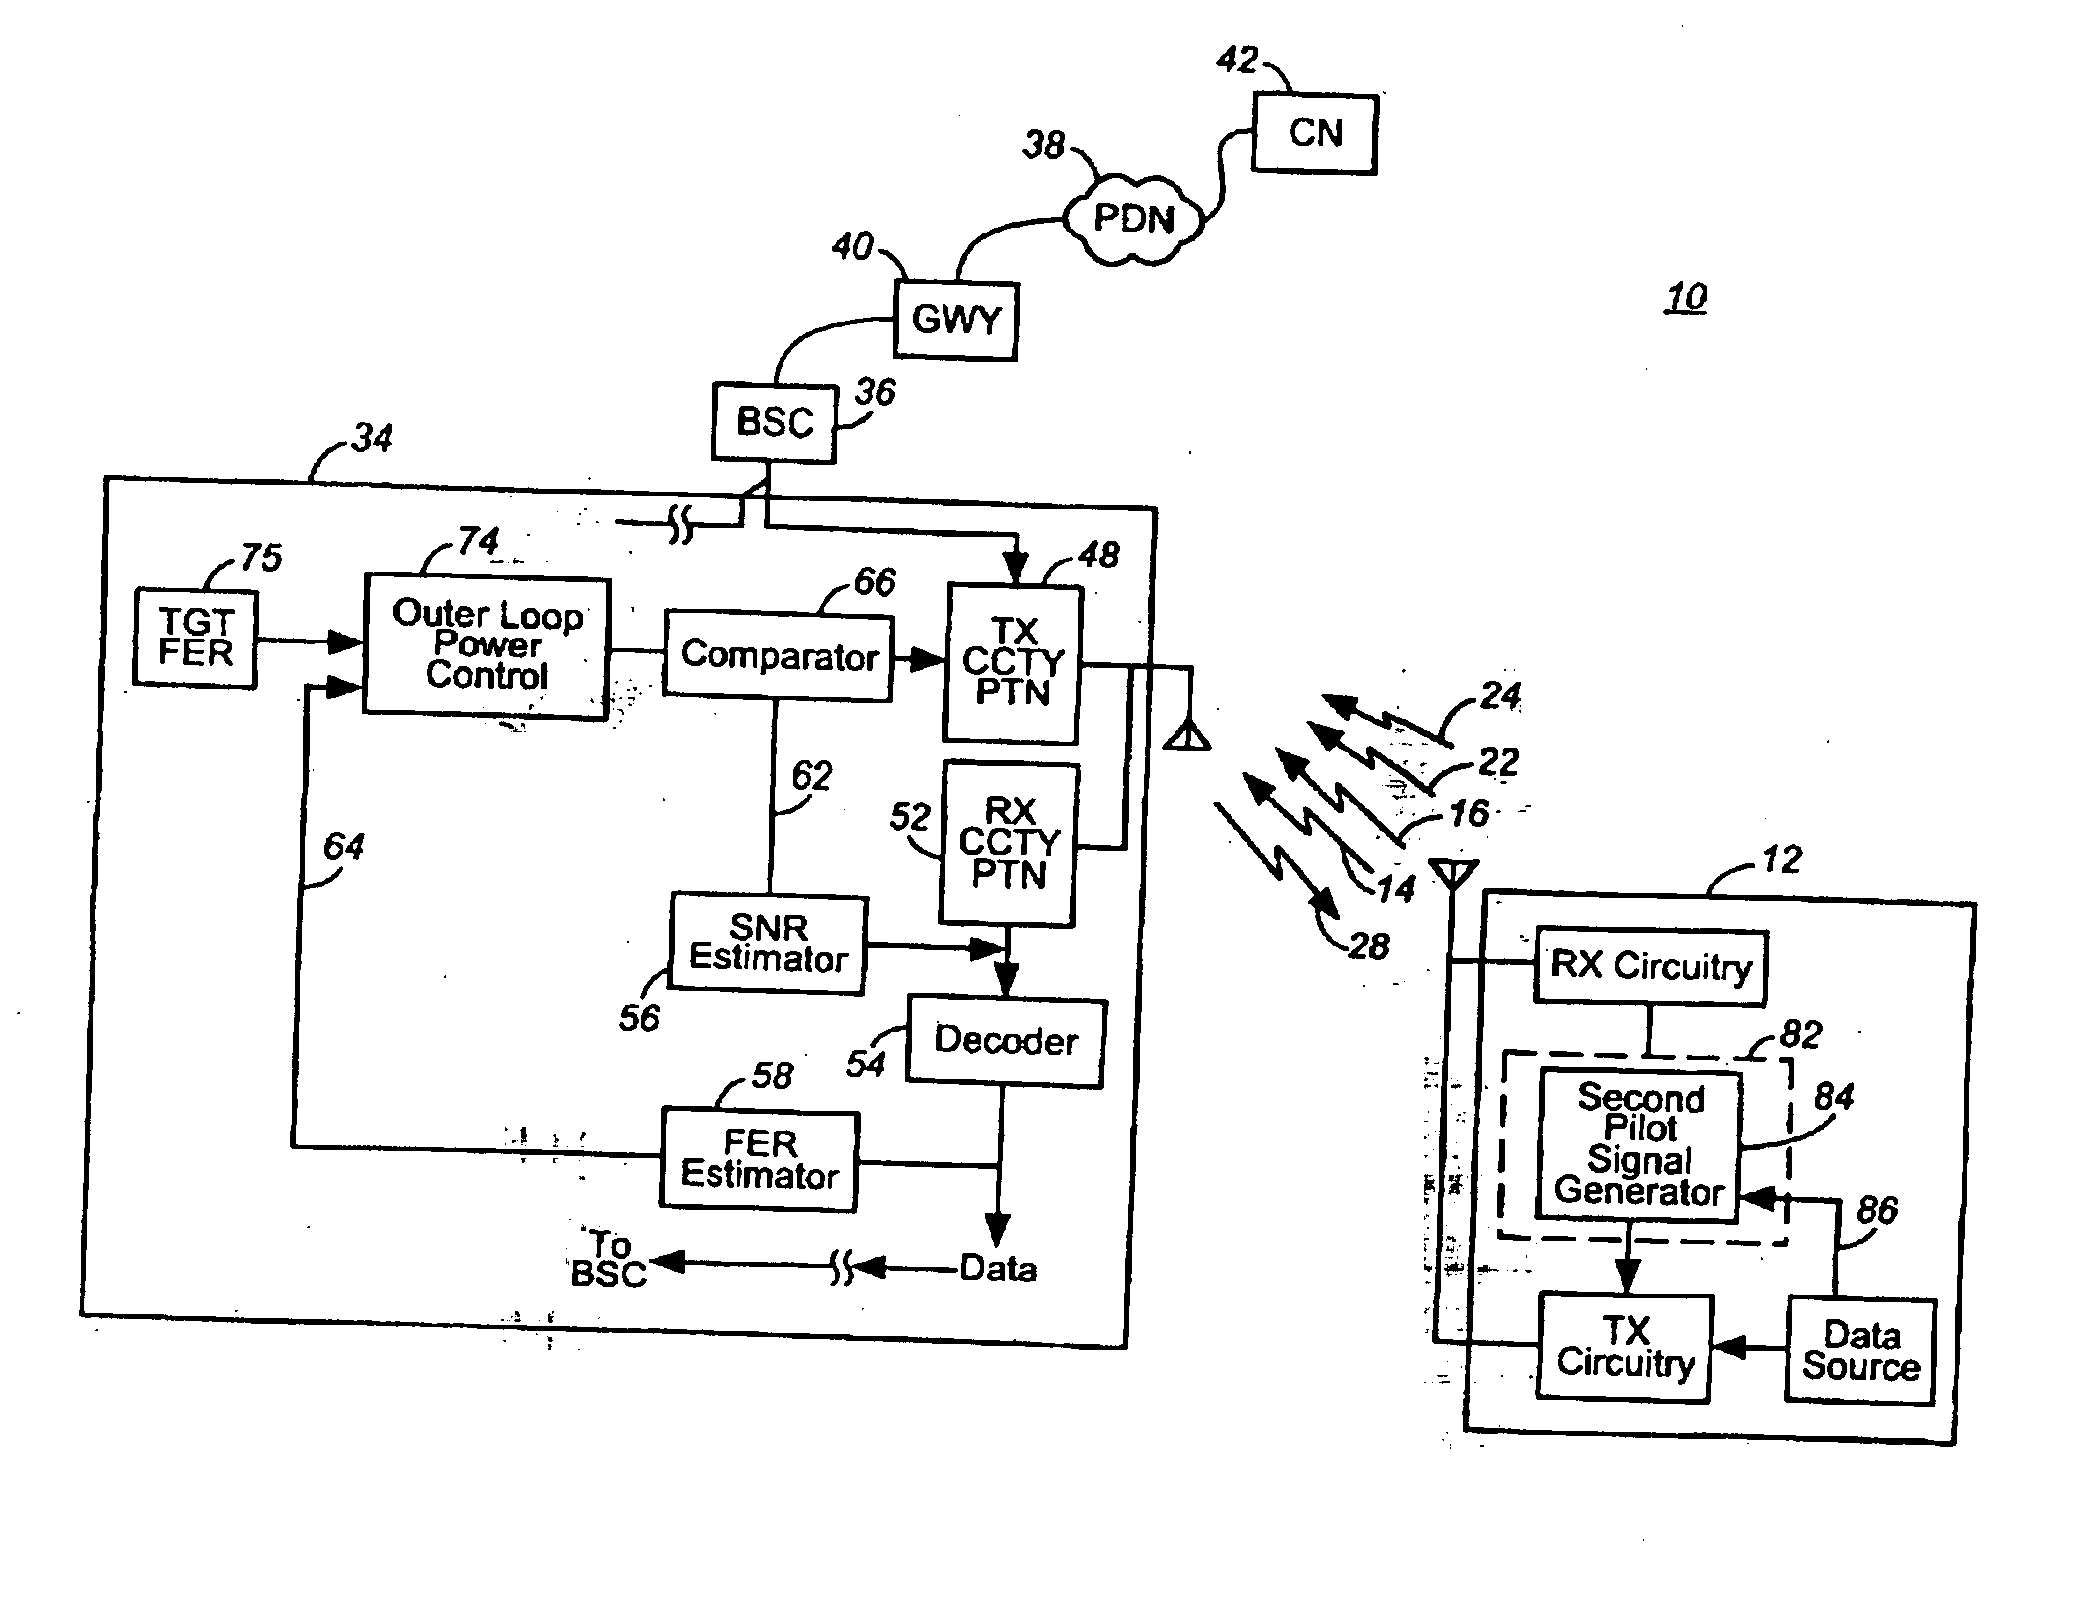 Apparatus and an associated method for facilitating communications in a radio communication system that provides for data communications at multiple data rates